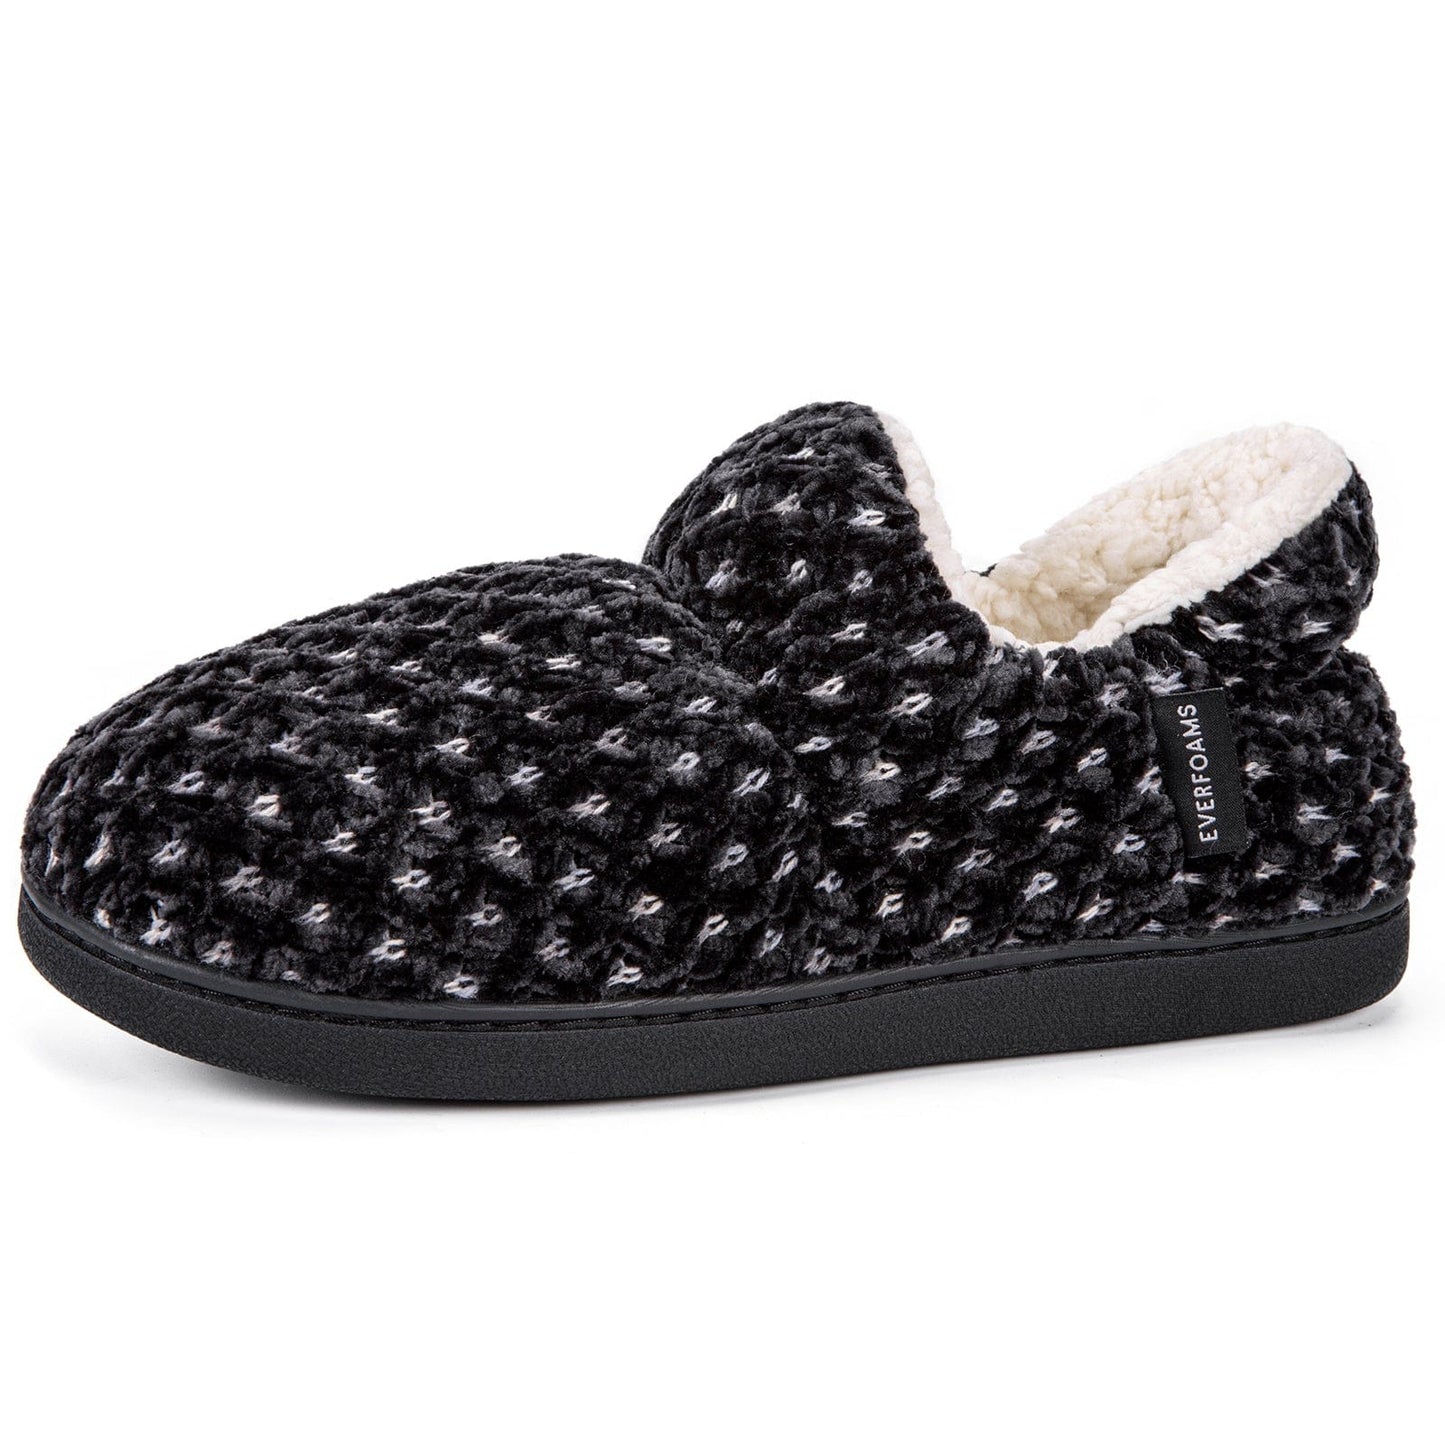 Women's Chenille Ankle Bootie Slippers-Black